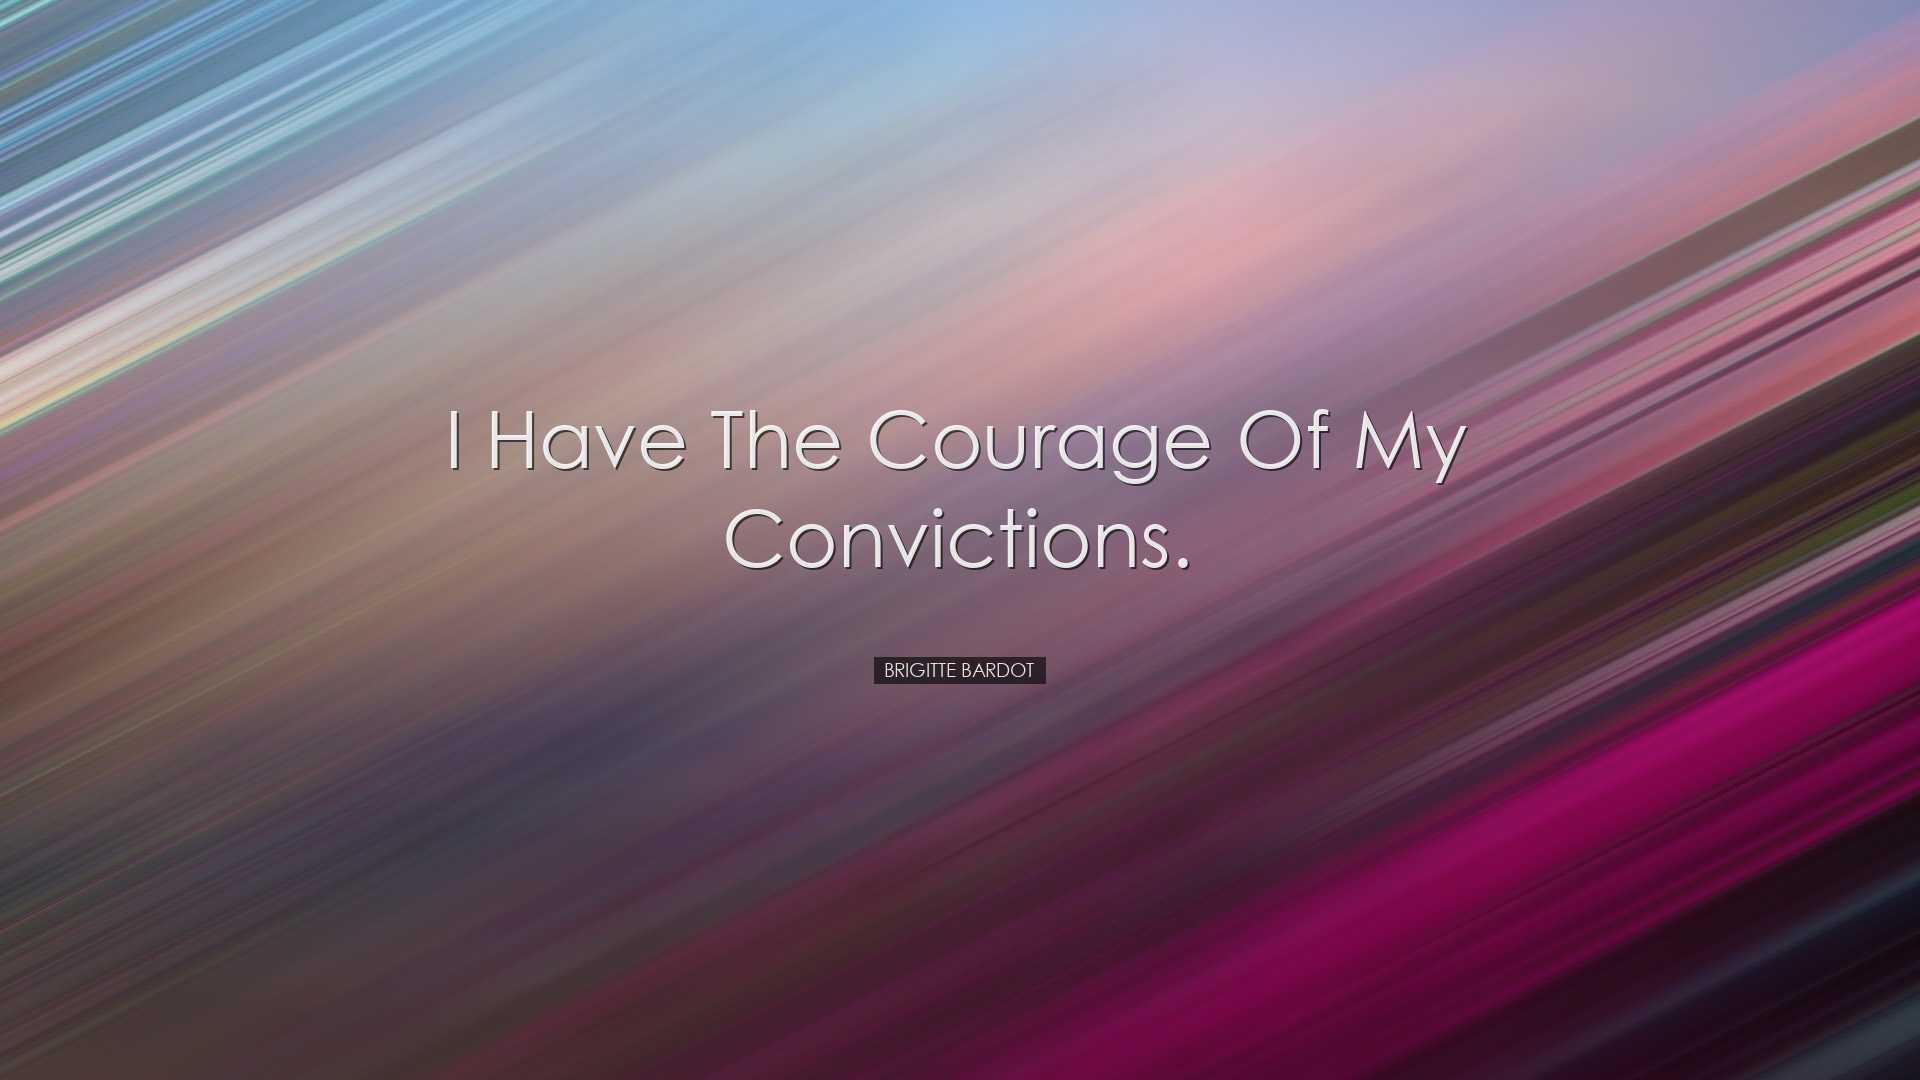 I have the courage of my convictions. - Brigitte Bardot